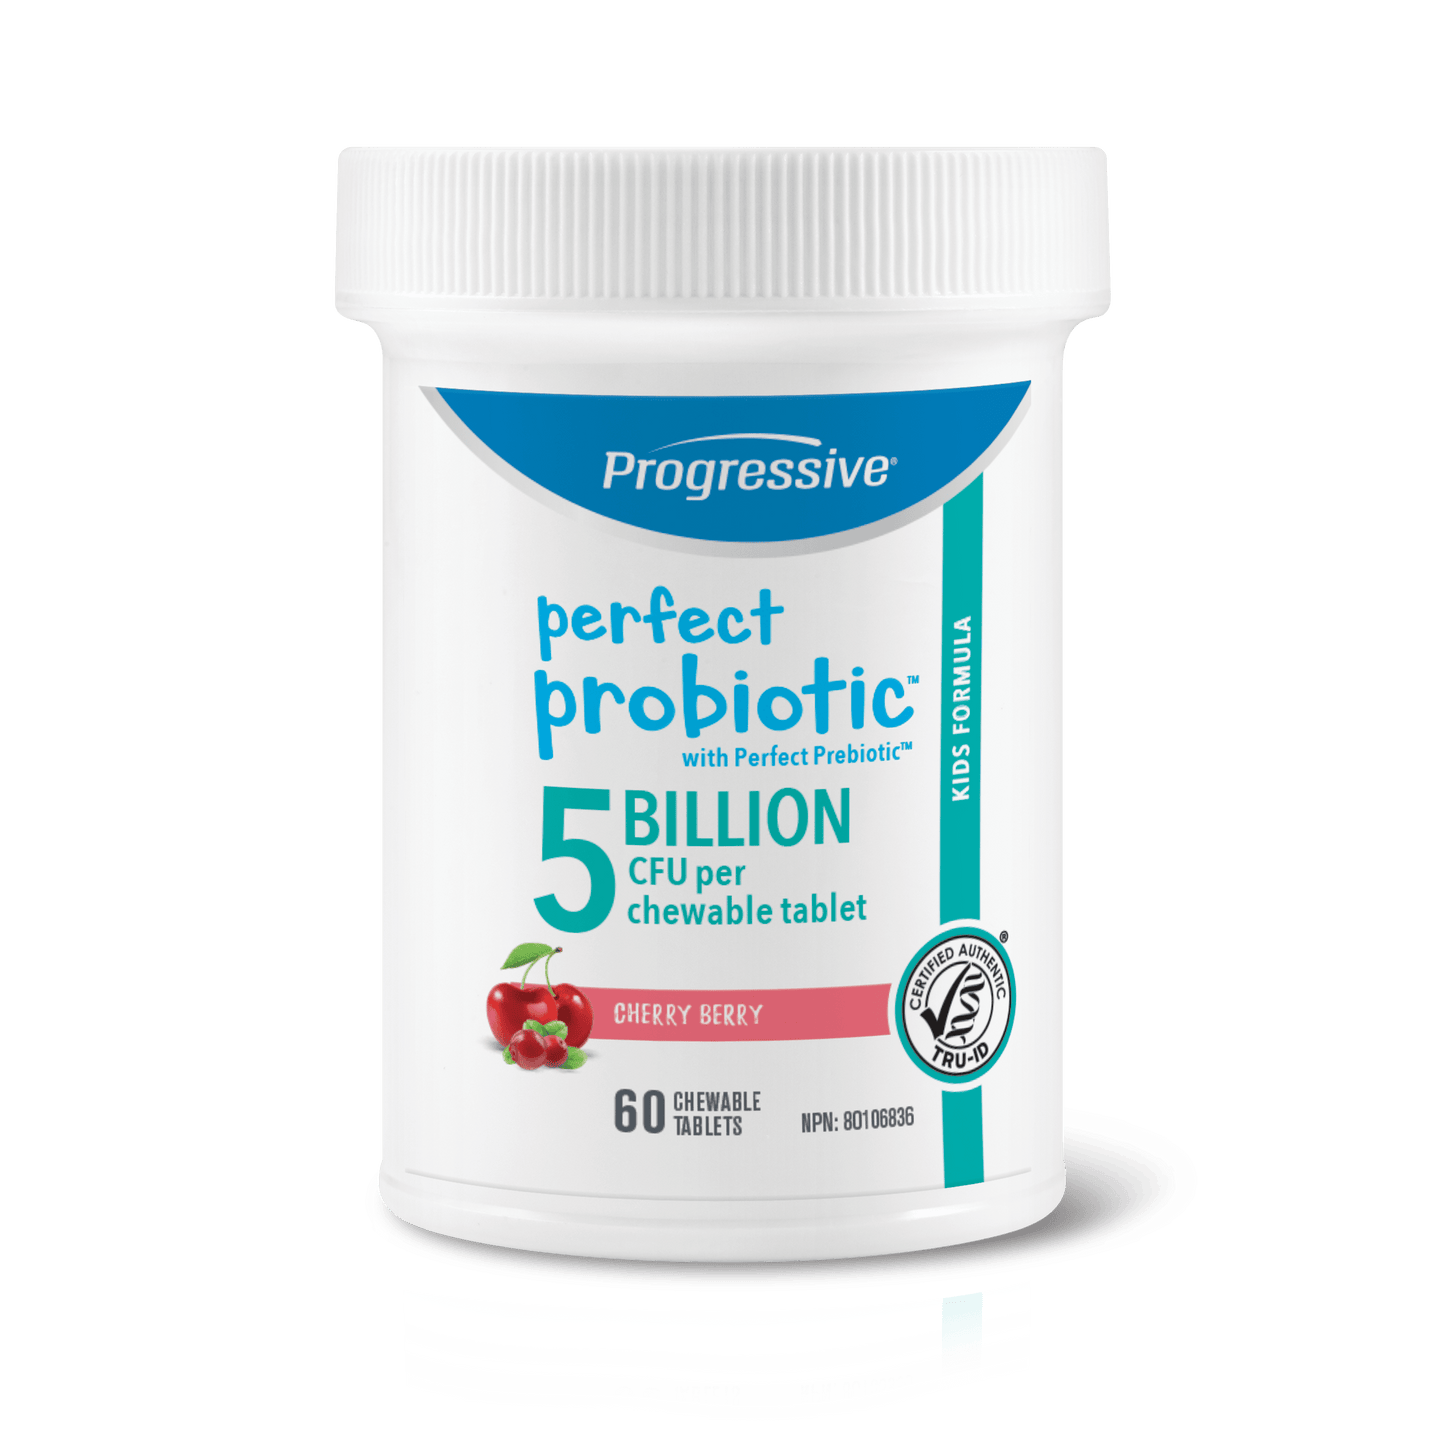 A bottle of  Perfect Probiotic For Kids 5 Billion CFU per chewable tablets 60 chewable tablets in flavour cherry berry